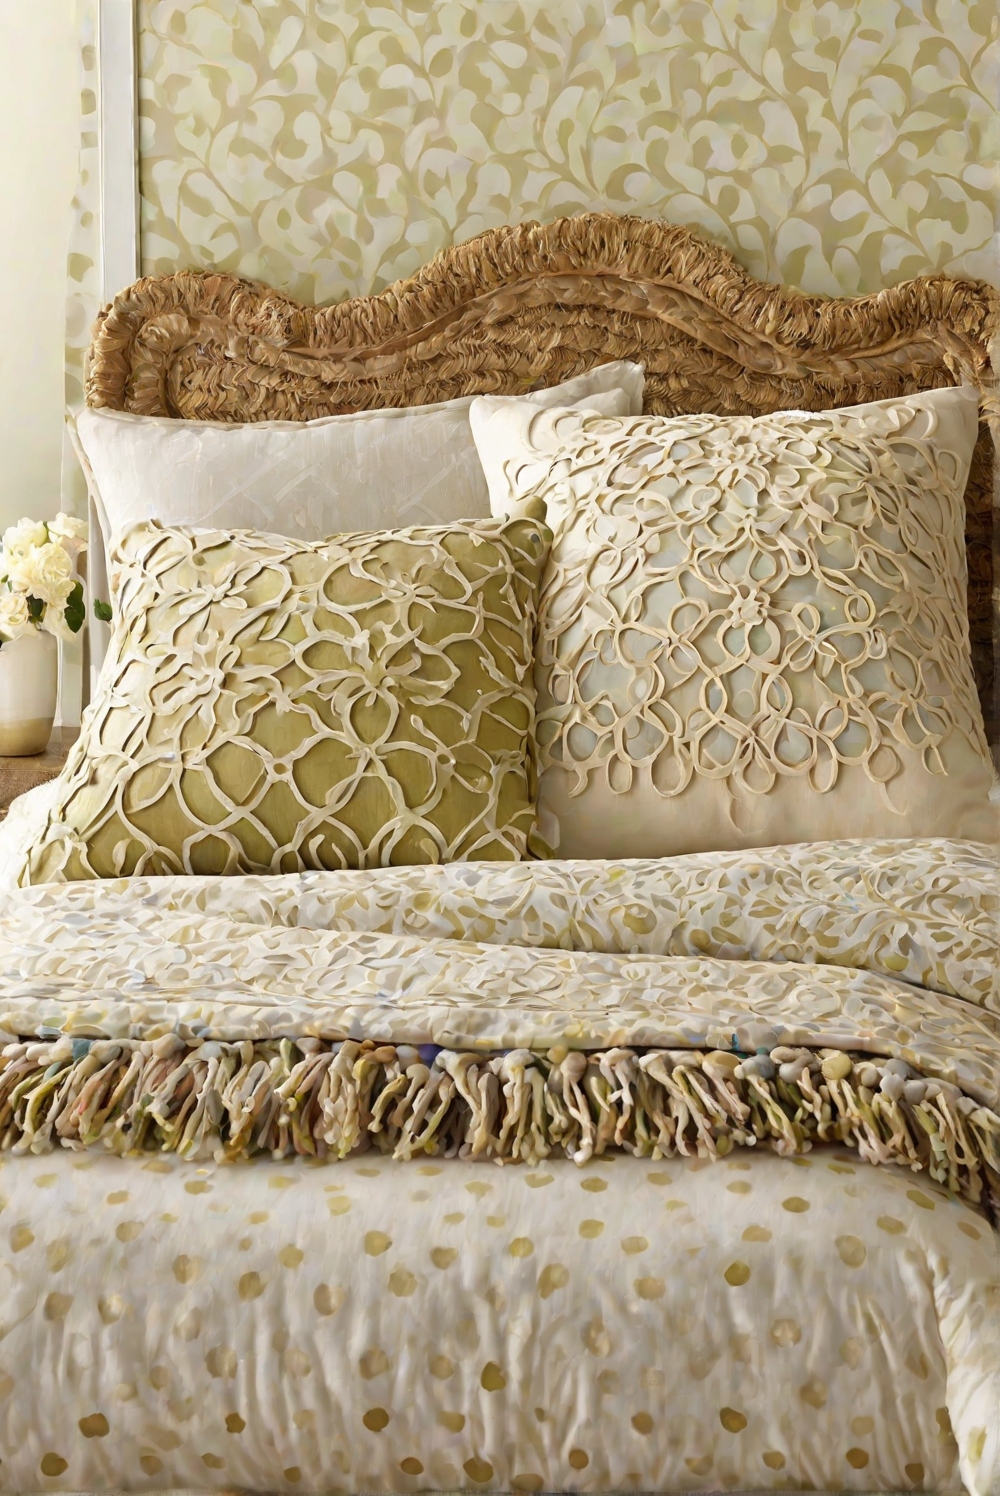 5 Ideas for Adding Decorative Pillows to Your Bed (Add more personalty )